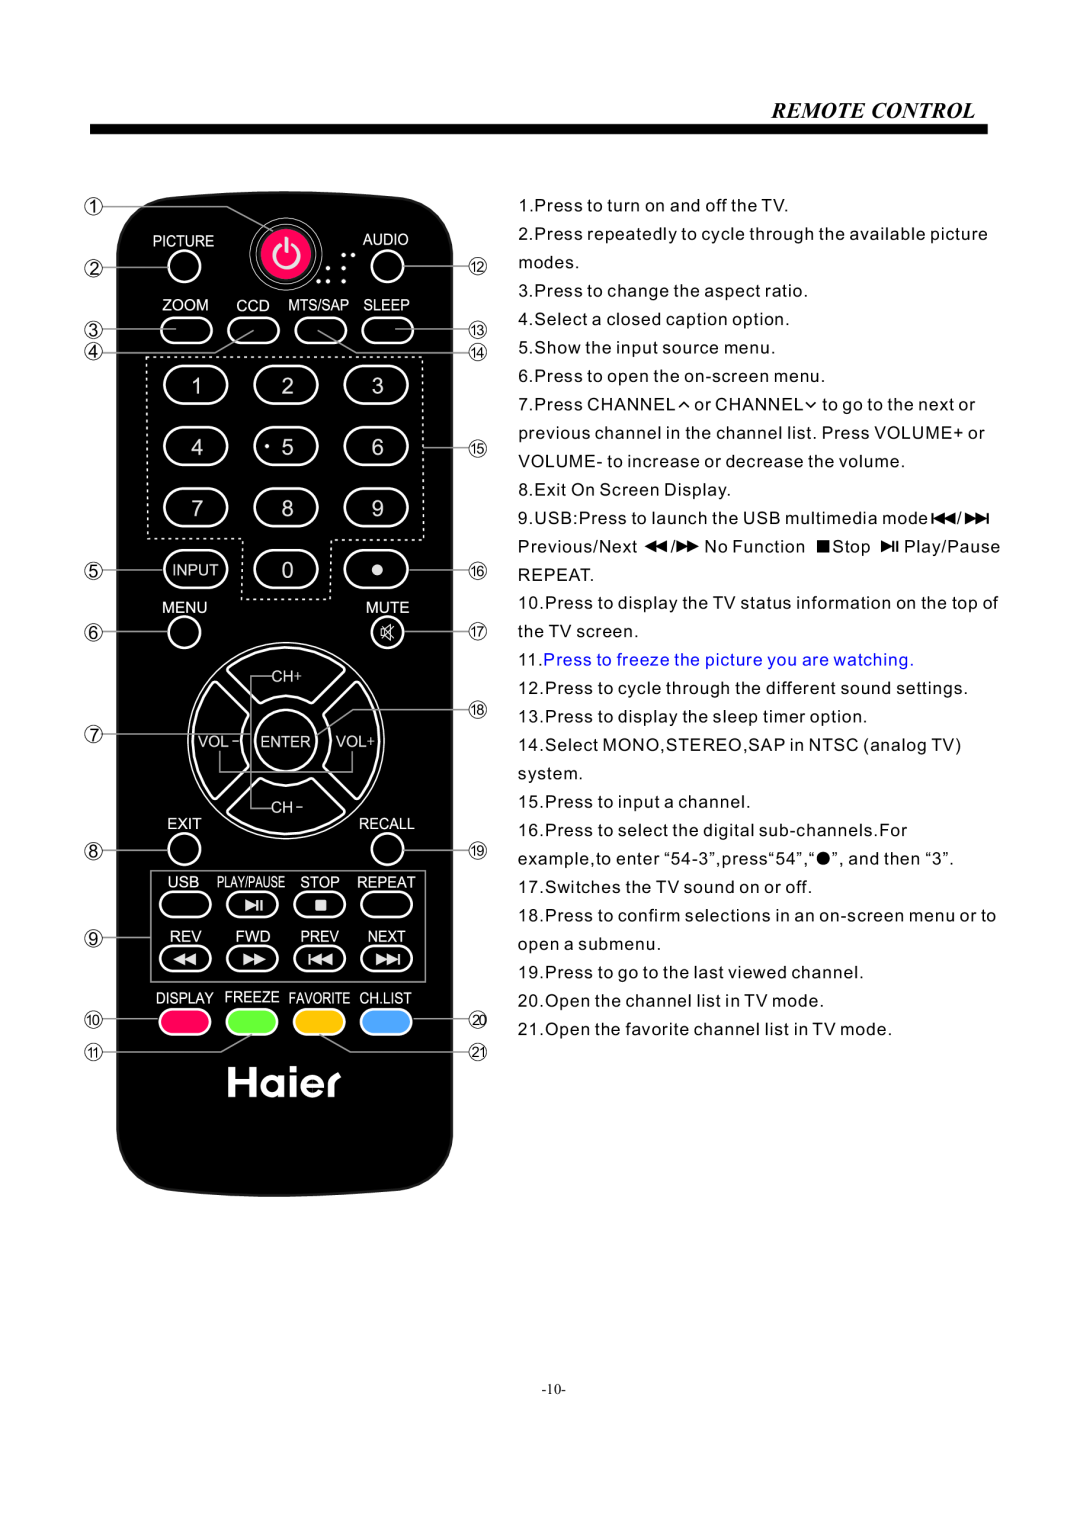 Haier LE46F2280 manual Remote Control, Press to freeze the picture you are watching 